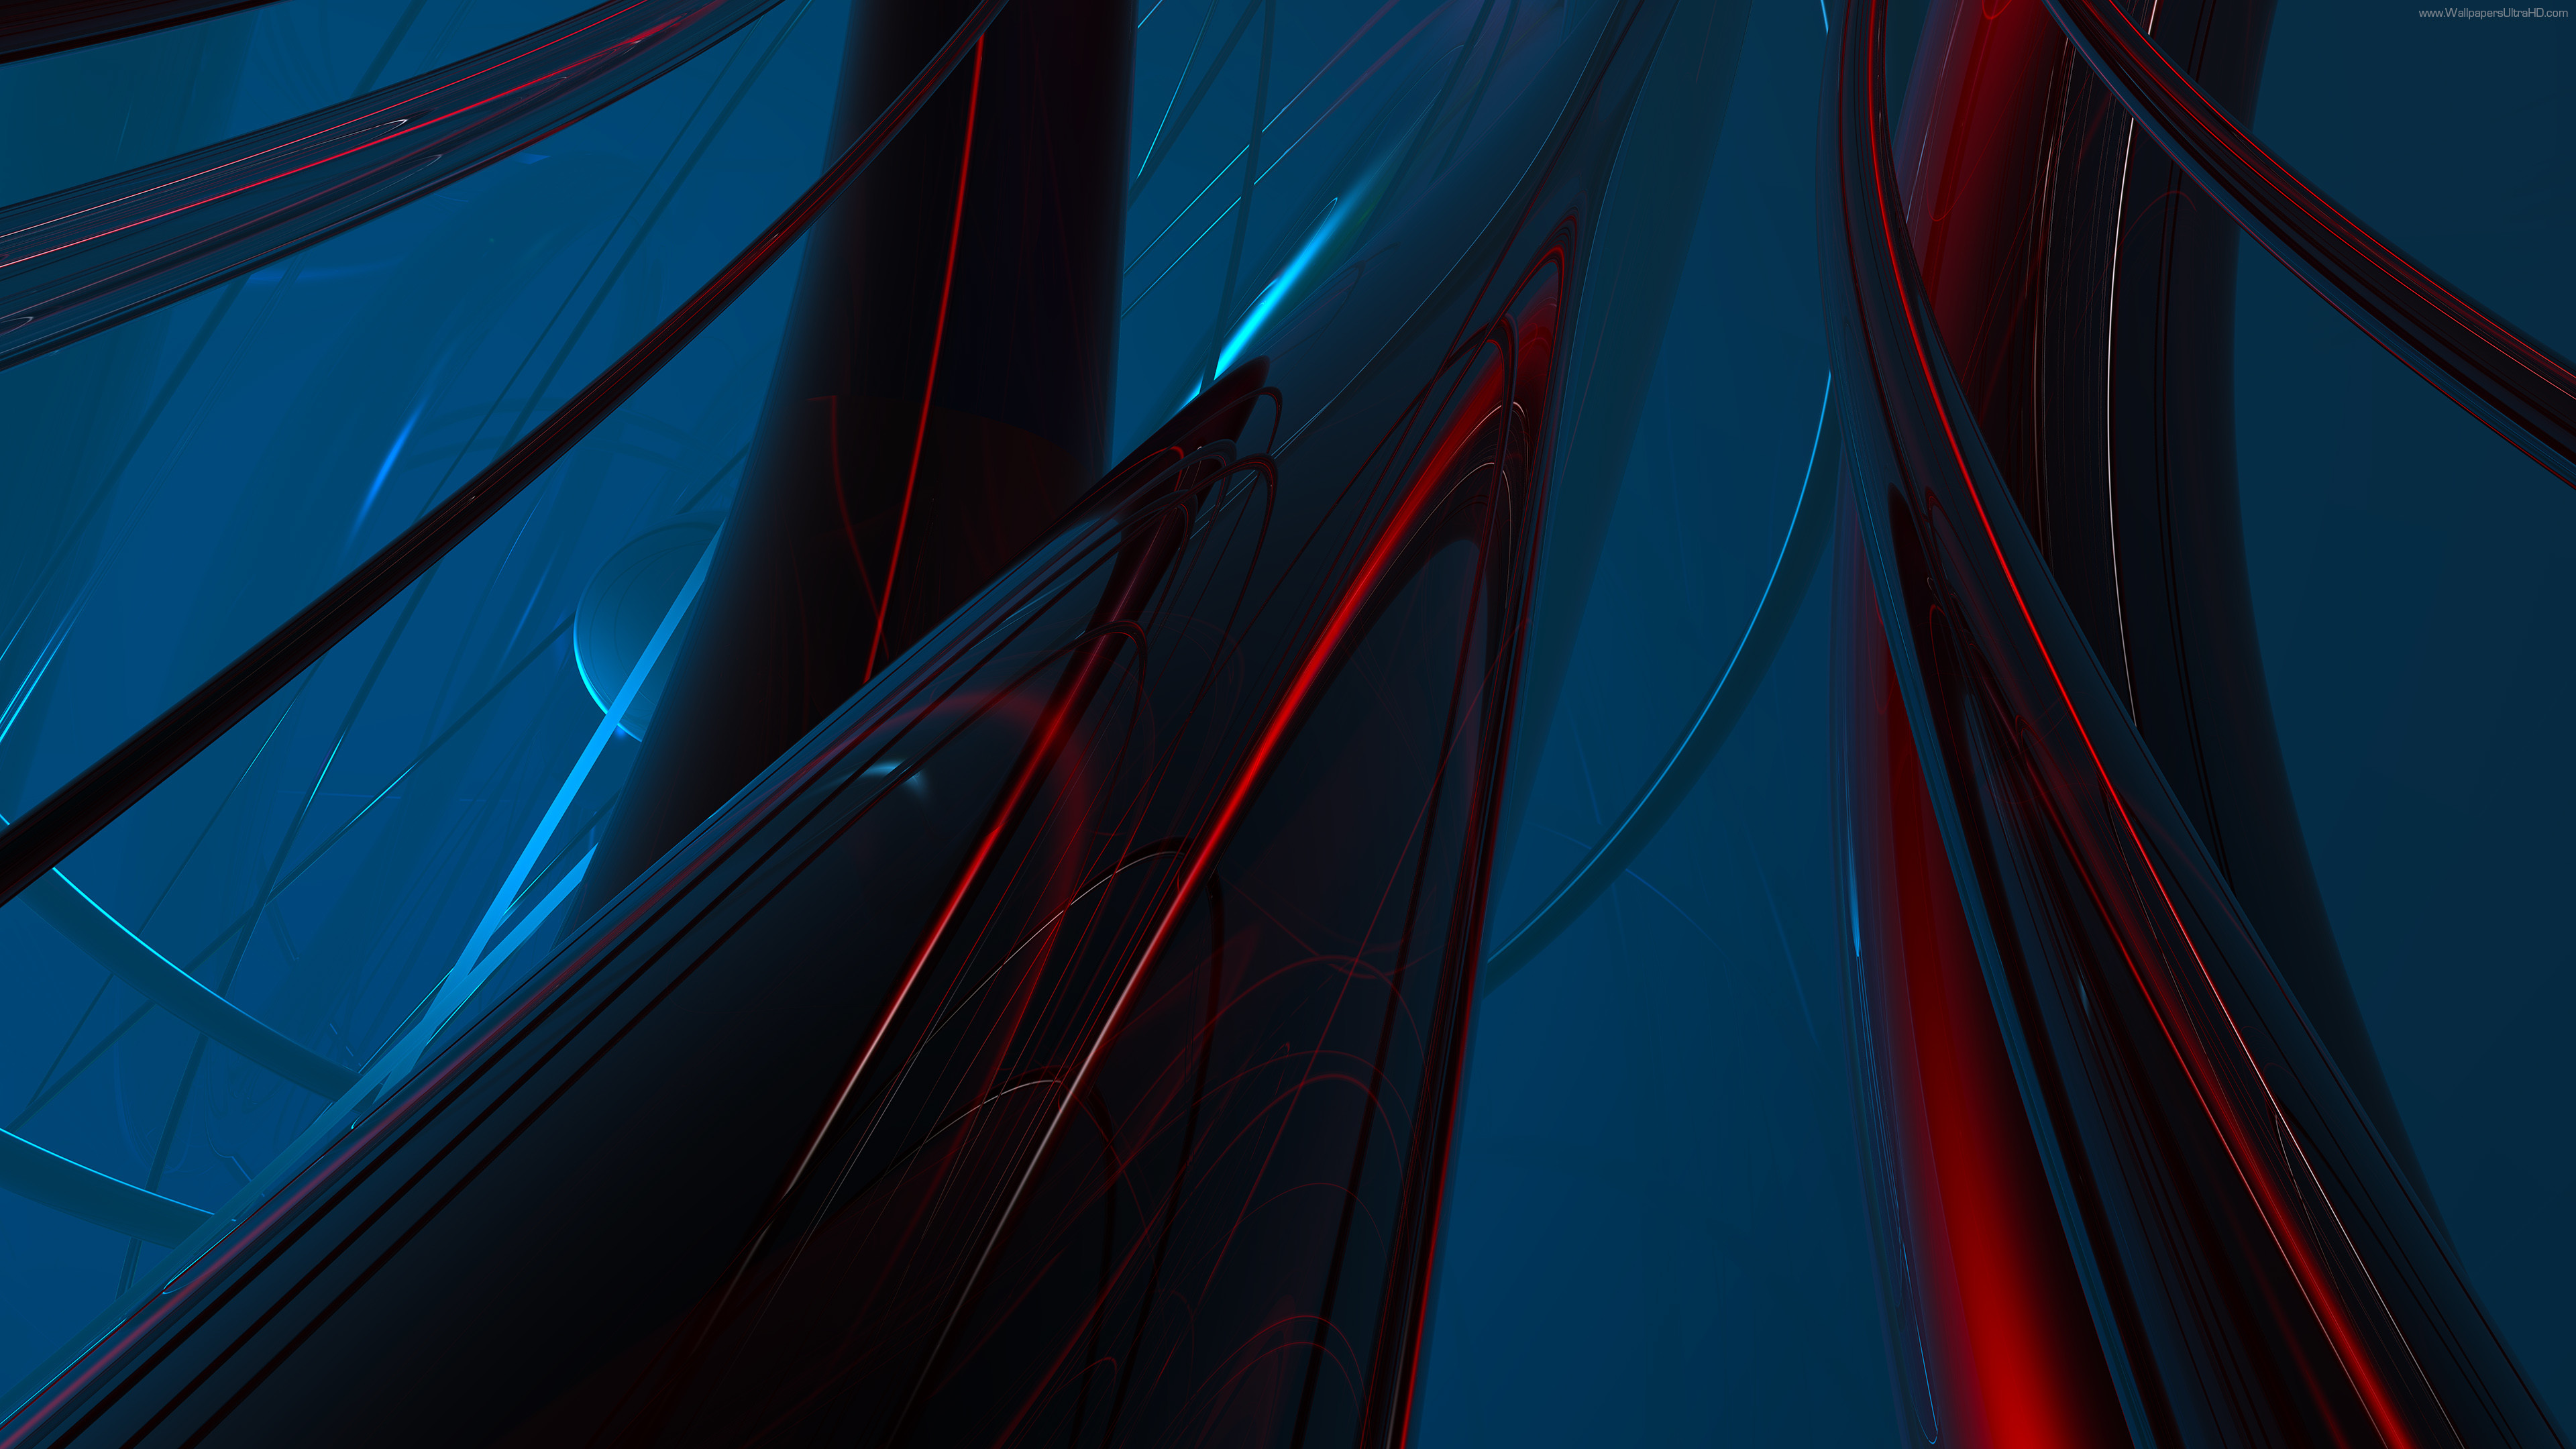 UHD wallpaper 4K Abstract red + blue, Abstract green + purple